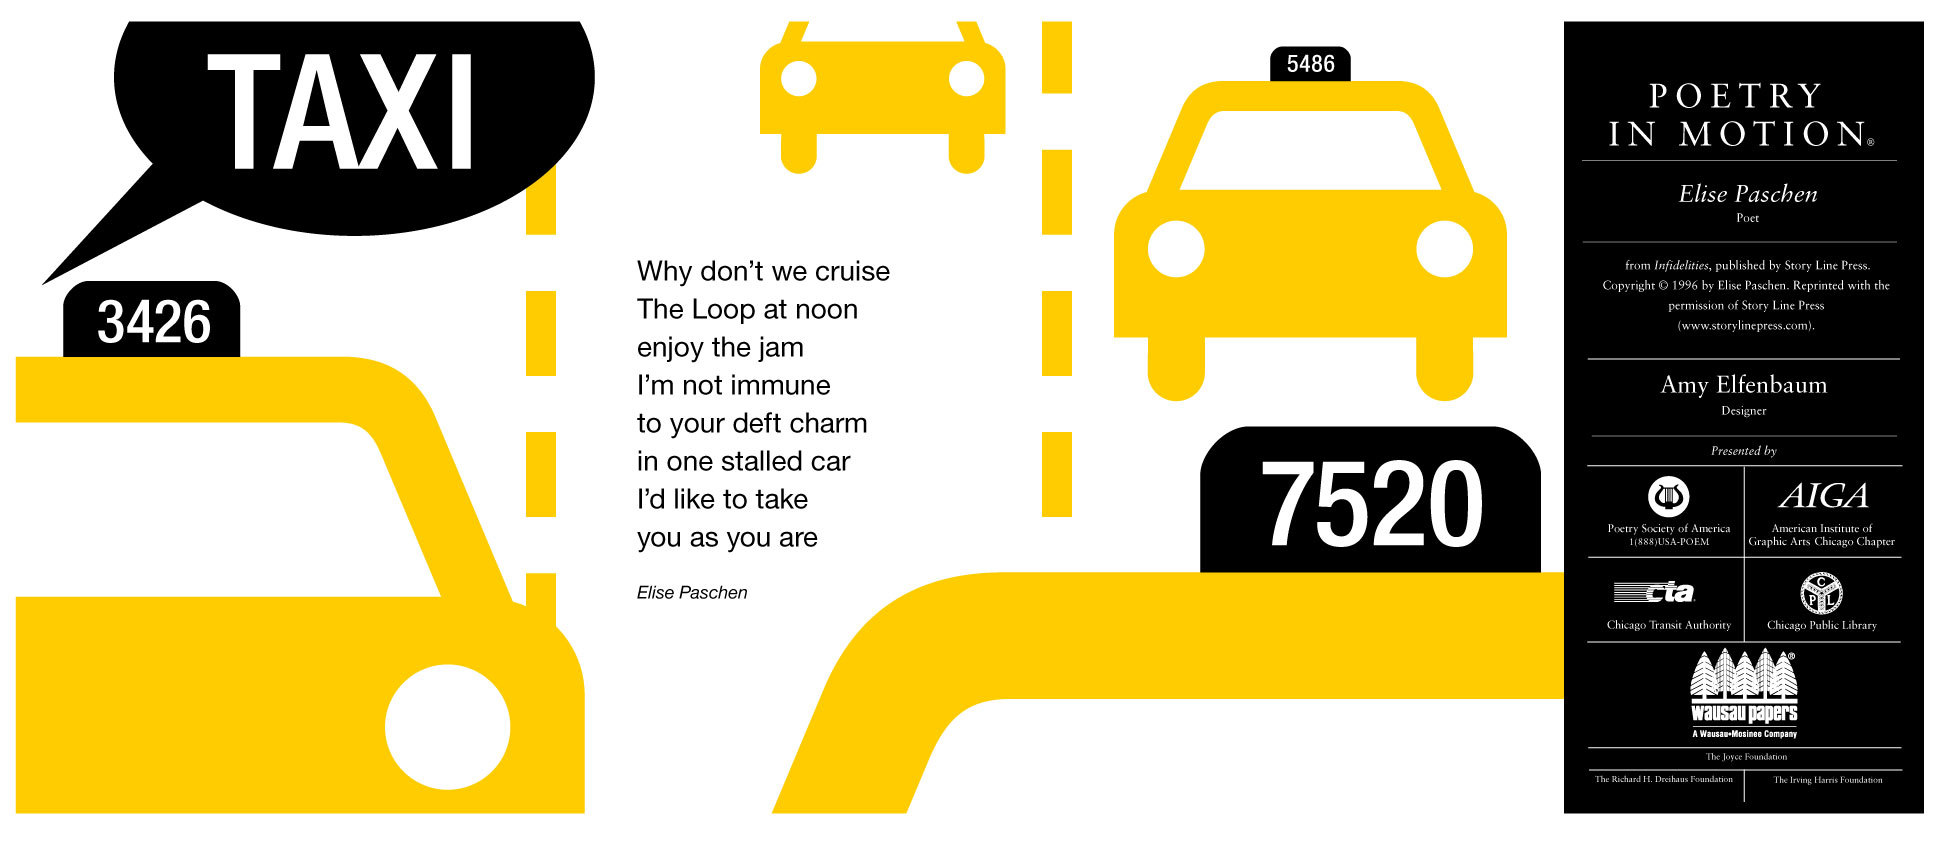 A white poster decorated with yellow taxis features the poem Taxi by Elise Paschen.